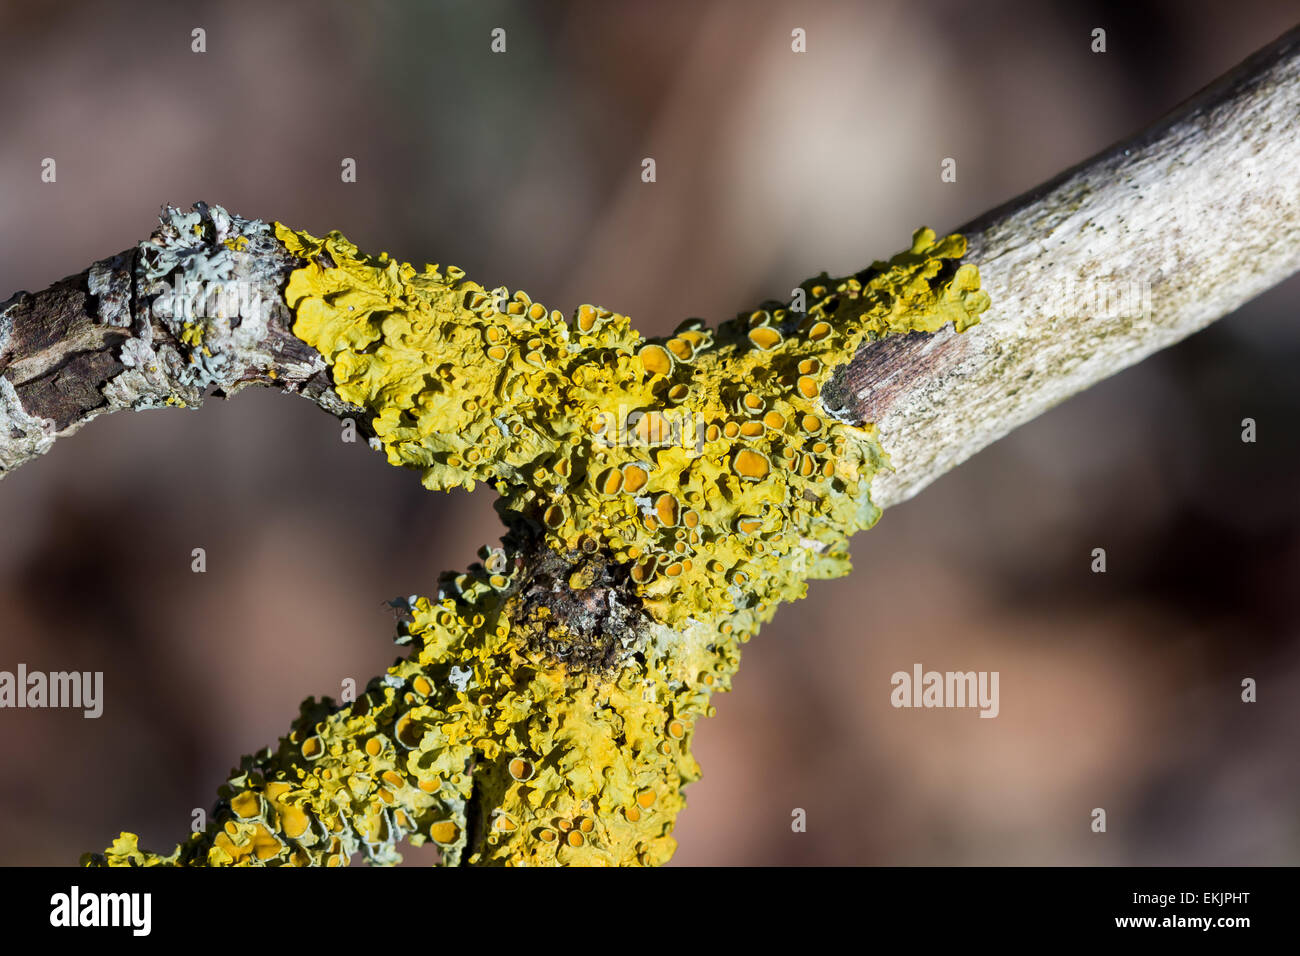 Yellow lichen growing on a tree branch Stock Photo